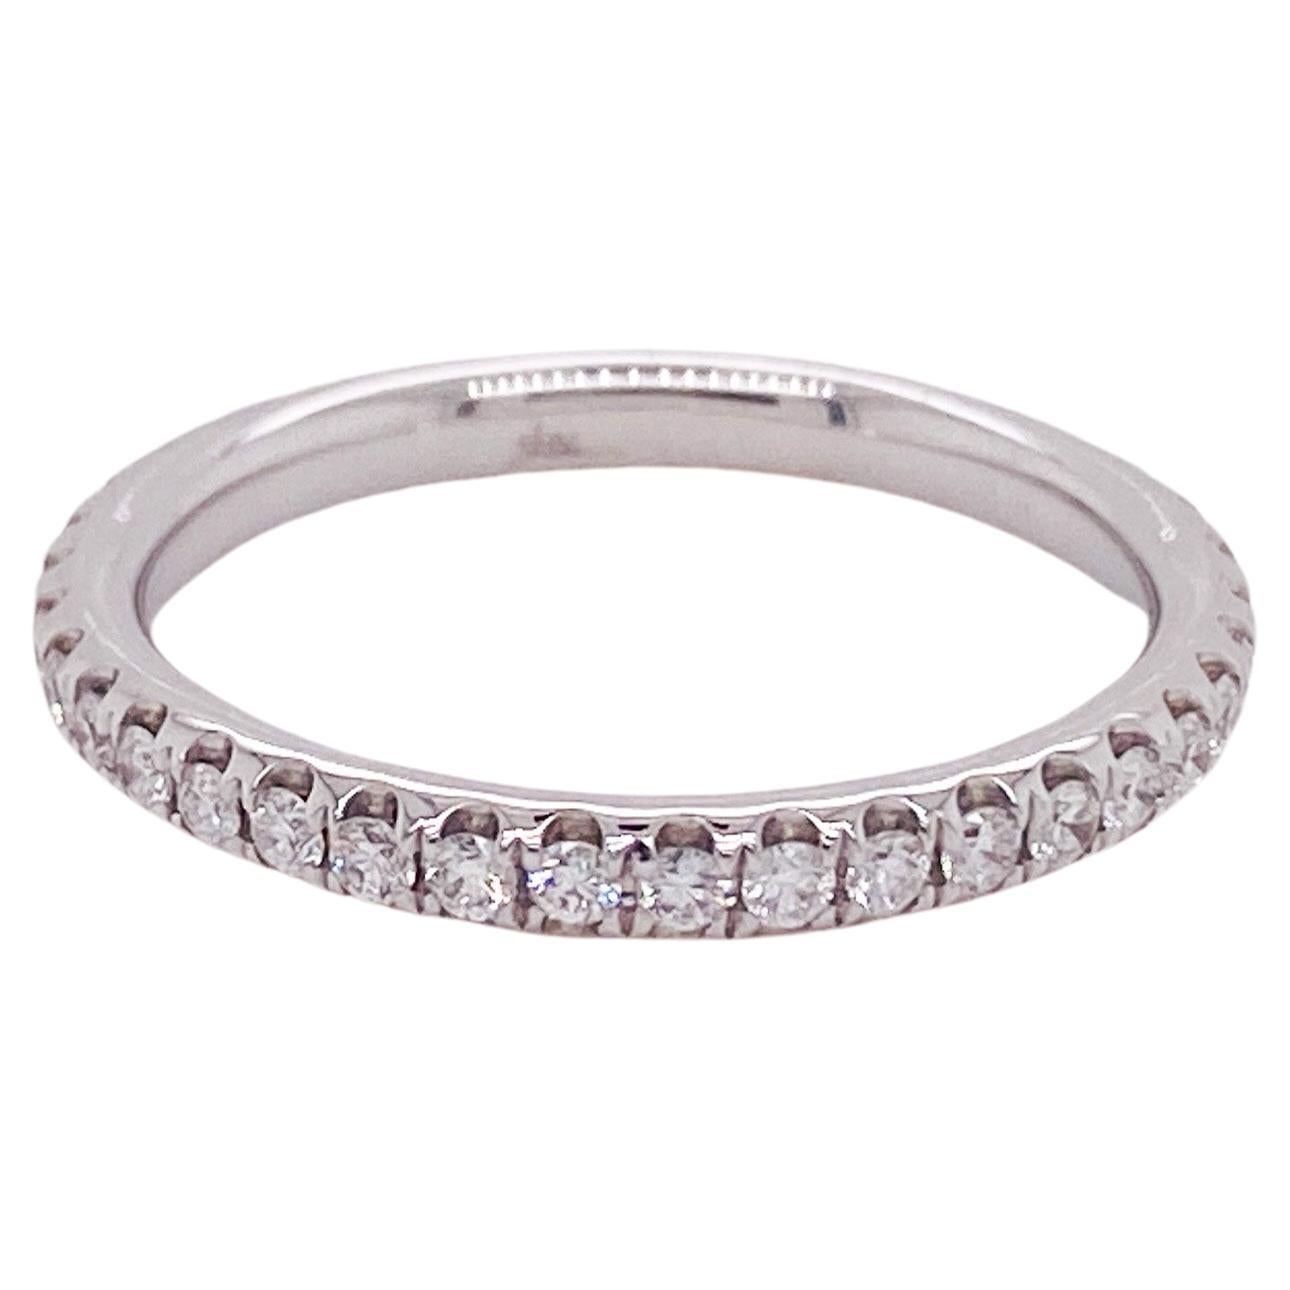 Diamond Eternity Ring Stackable Band 0.55 Carat 14k White Gold, Low Profile